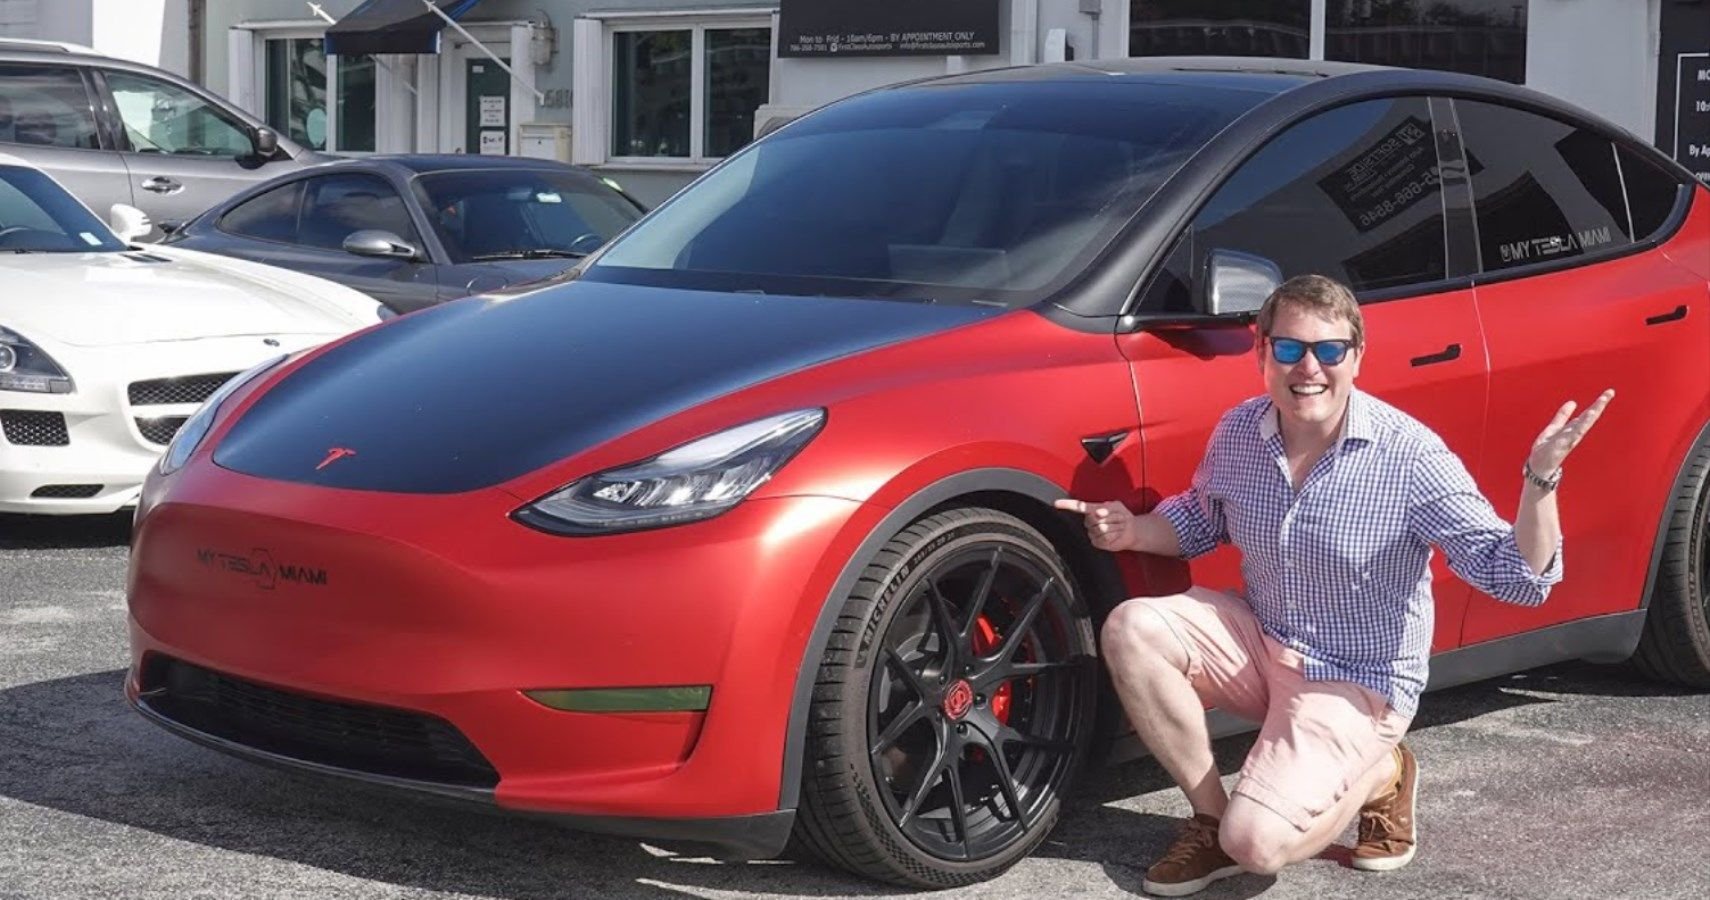 Shmee150 Ponders An Electric Future With The Tesla Model Y